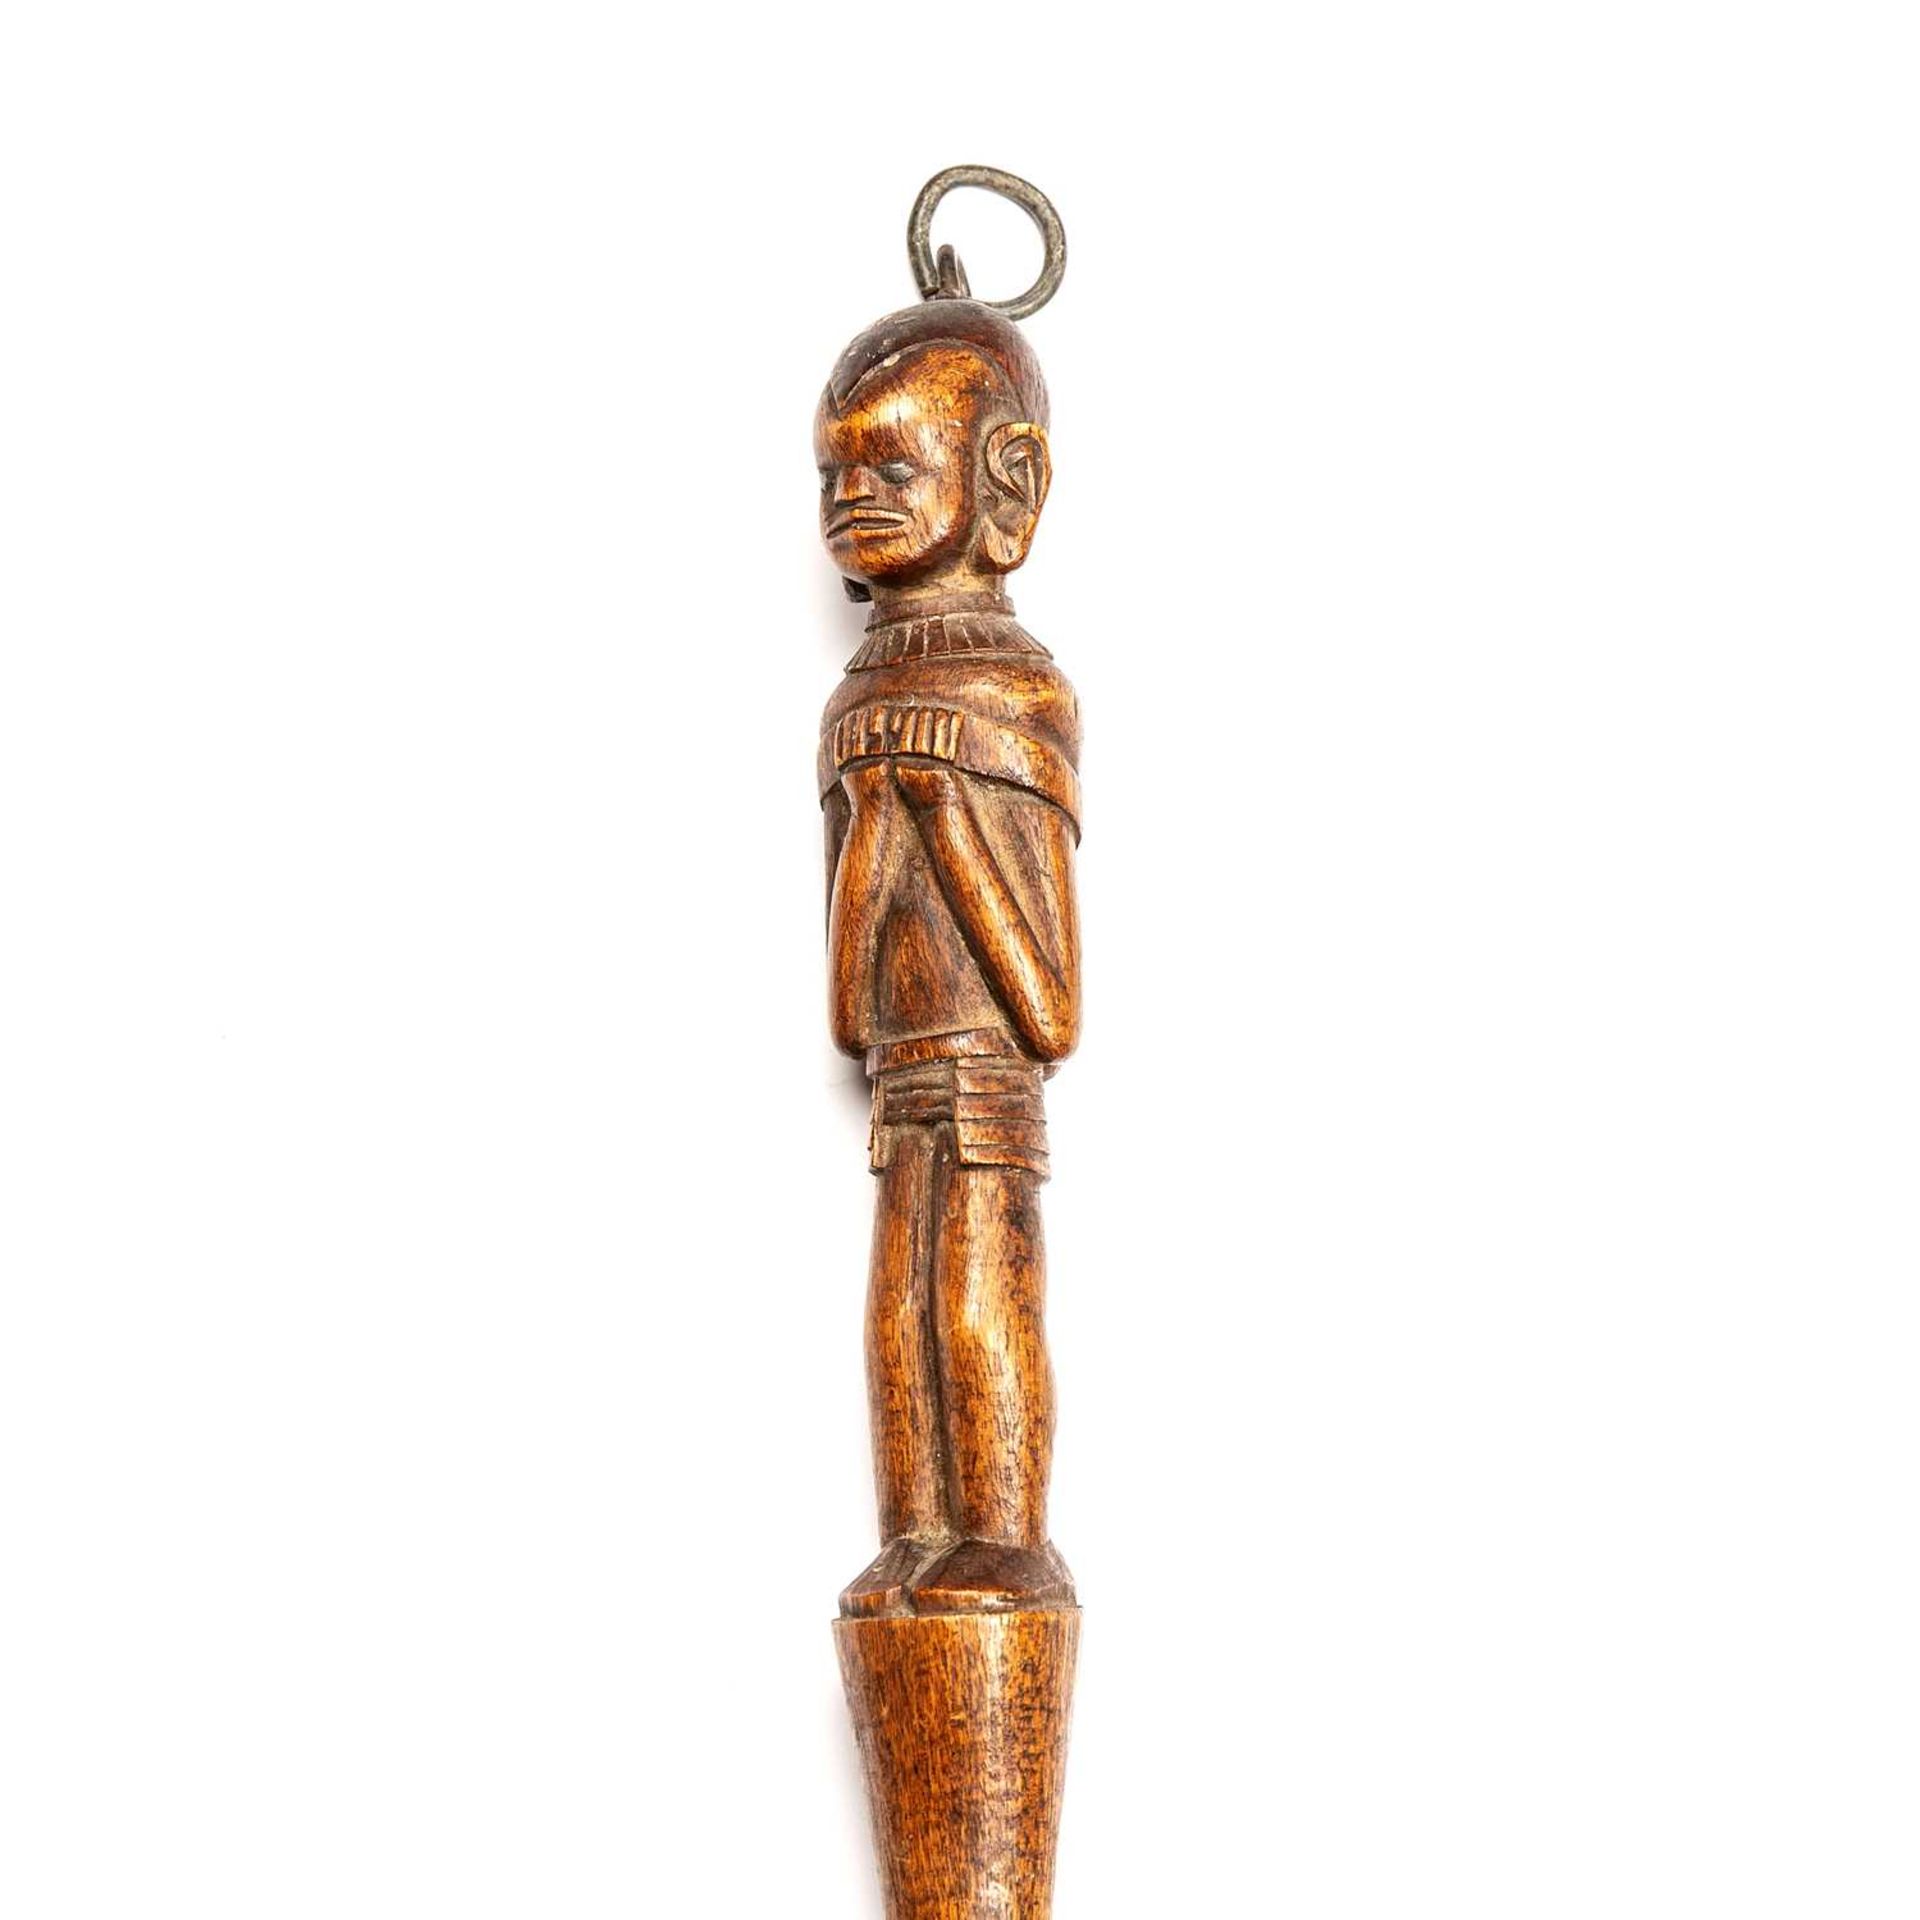 A Kamba Kenya carved wooden spoon with a female figure inlaid with metal eyes. 47cm in length. - Bild 2 aus 3